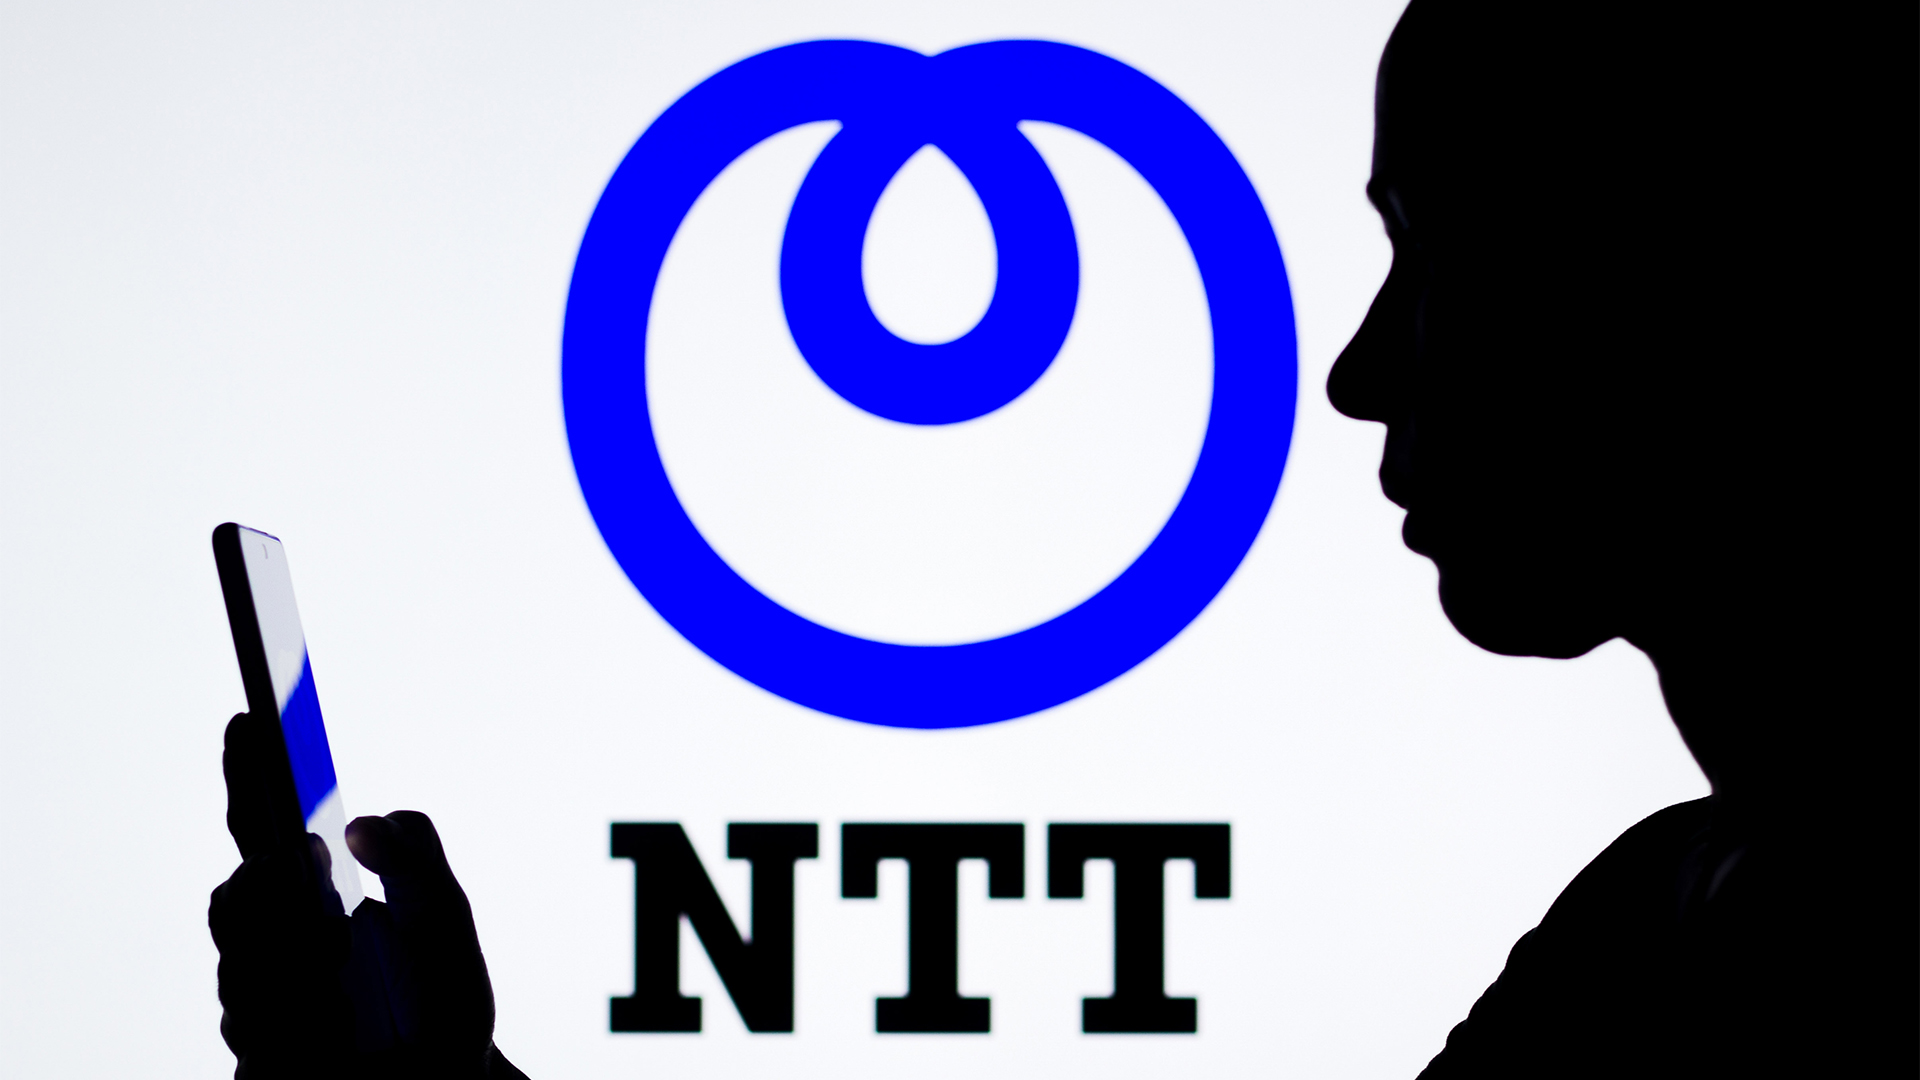 NTT just "merged" multiple data centers using low-latency networks